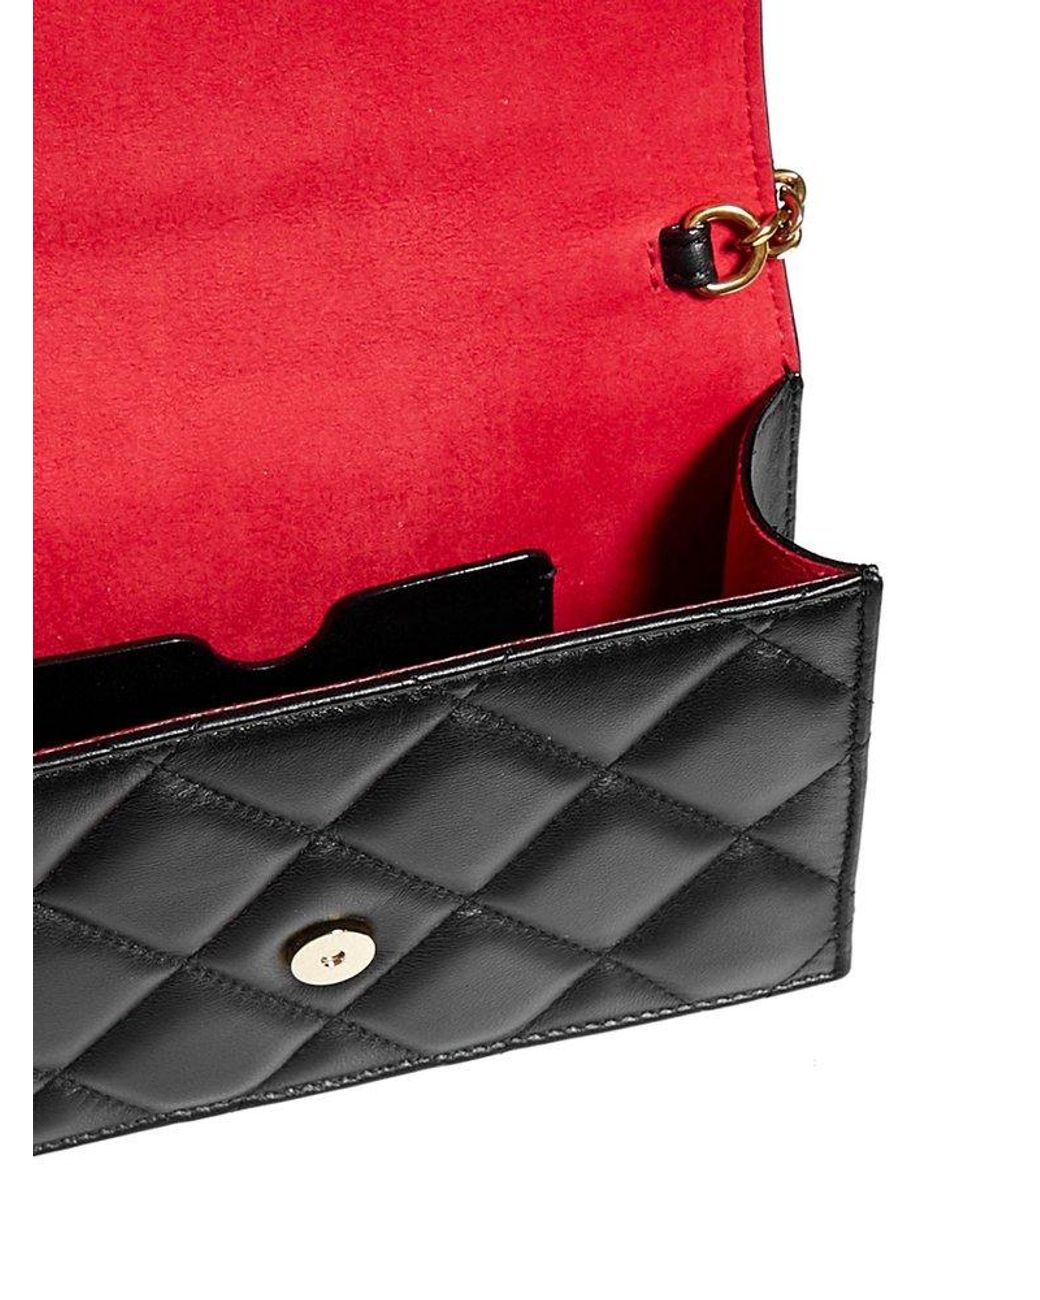 Alexander McQueen Skull Quilted Leather Mini Clutch Bag in Black 